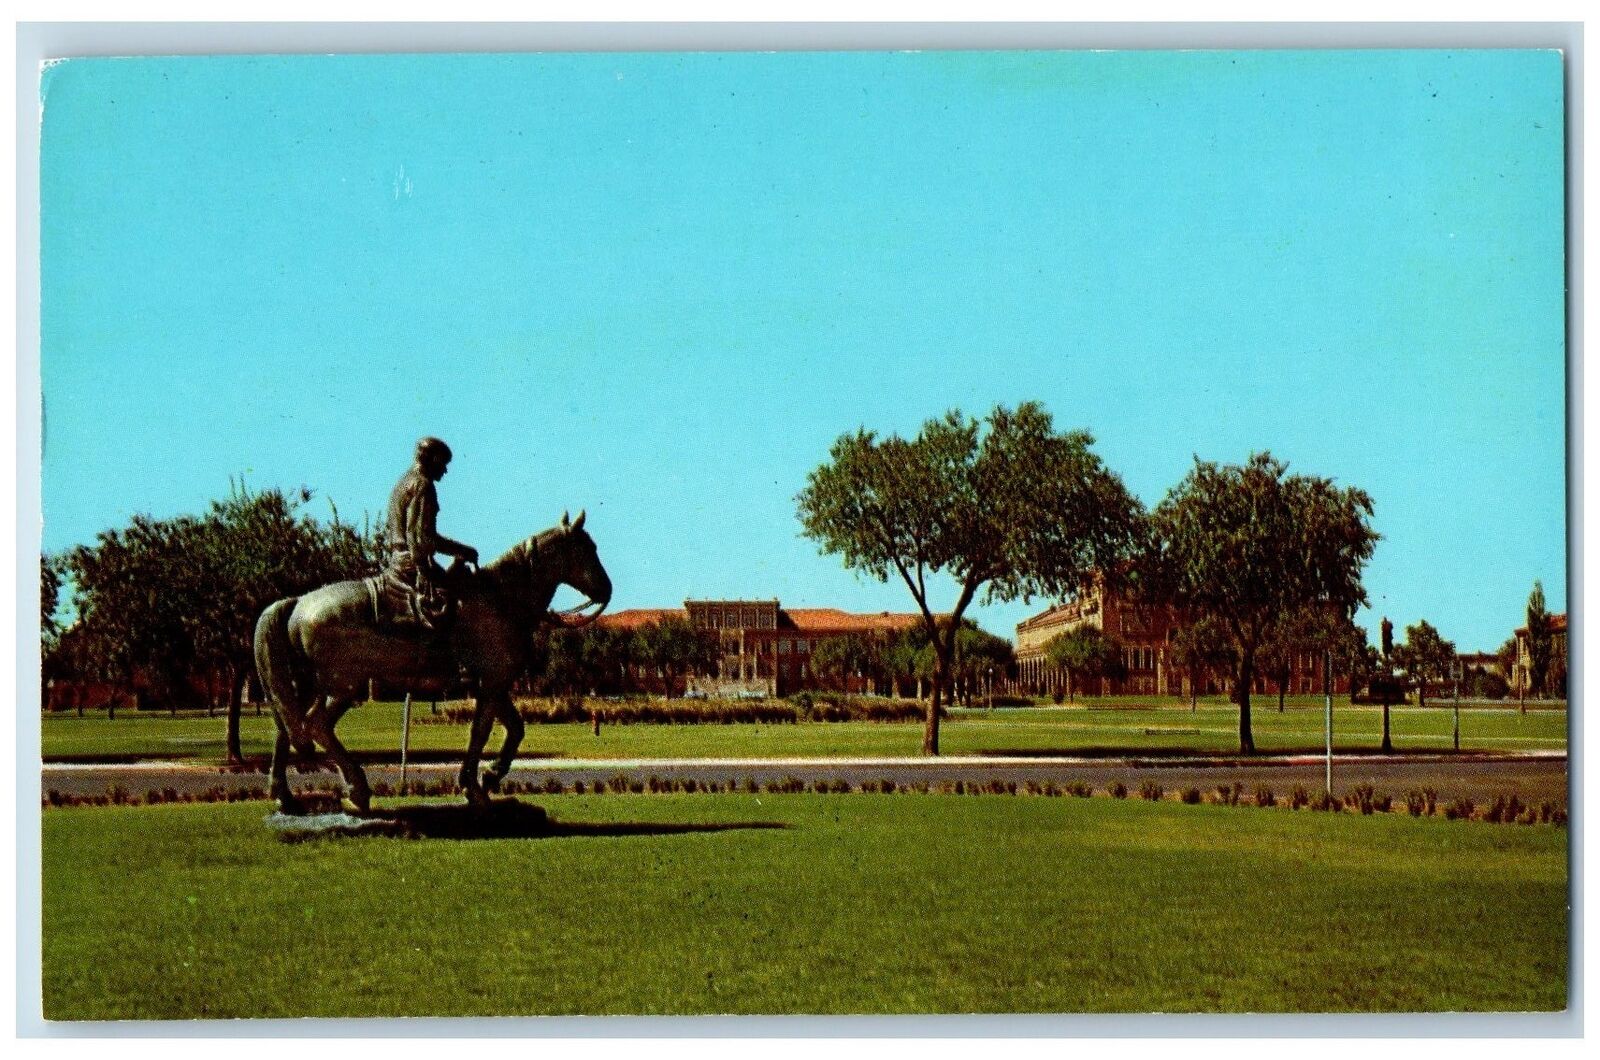 c1950 Statue Of Will Rogers Horse Riding Texas University Lubbock Texas Postcard